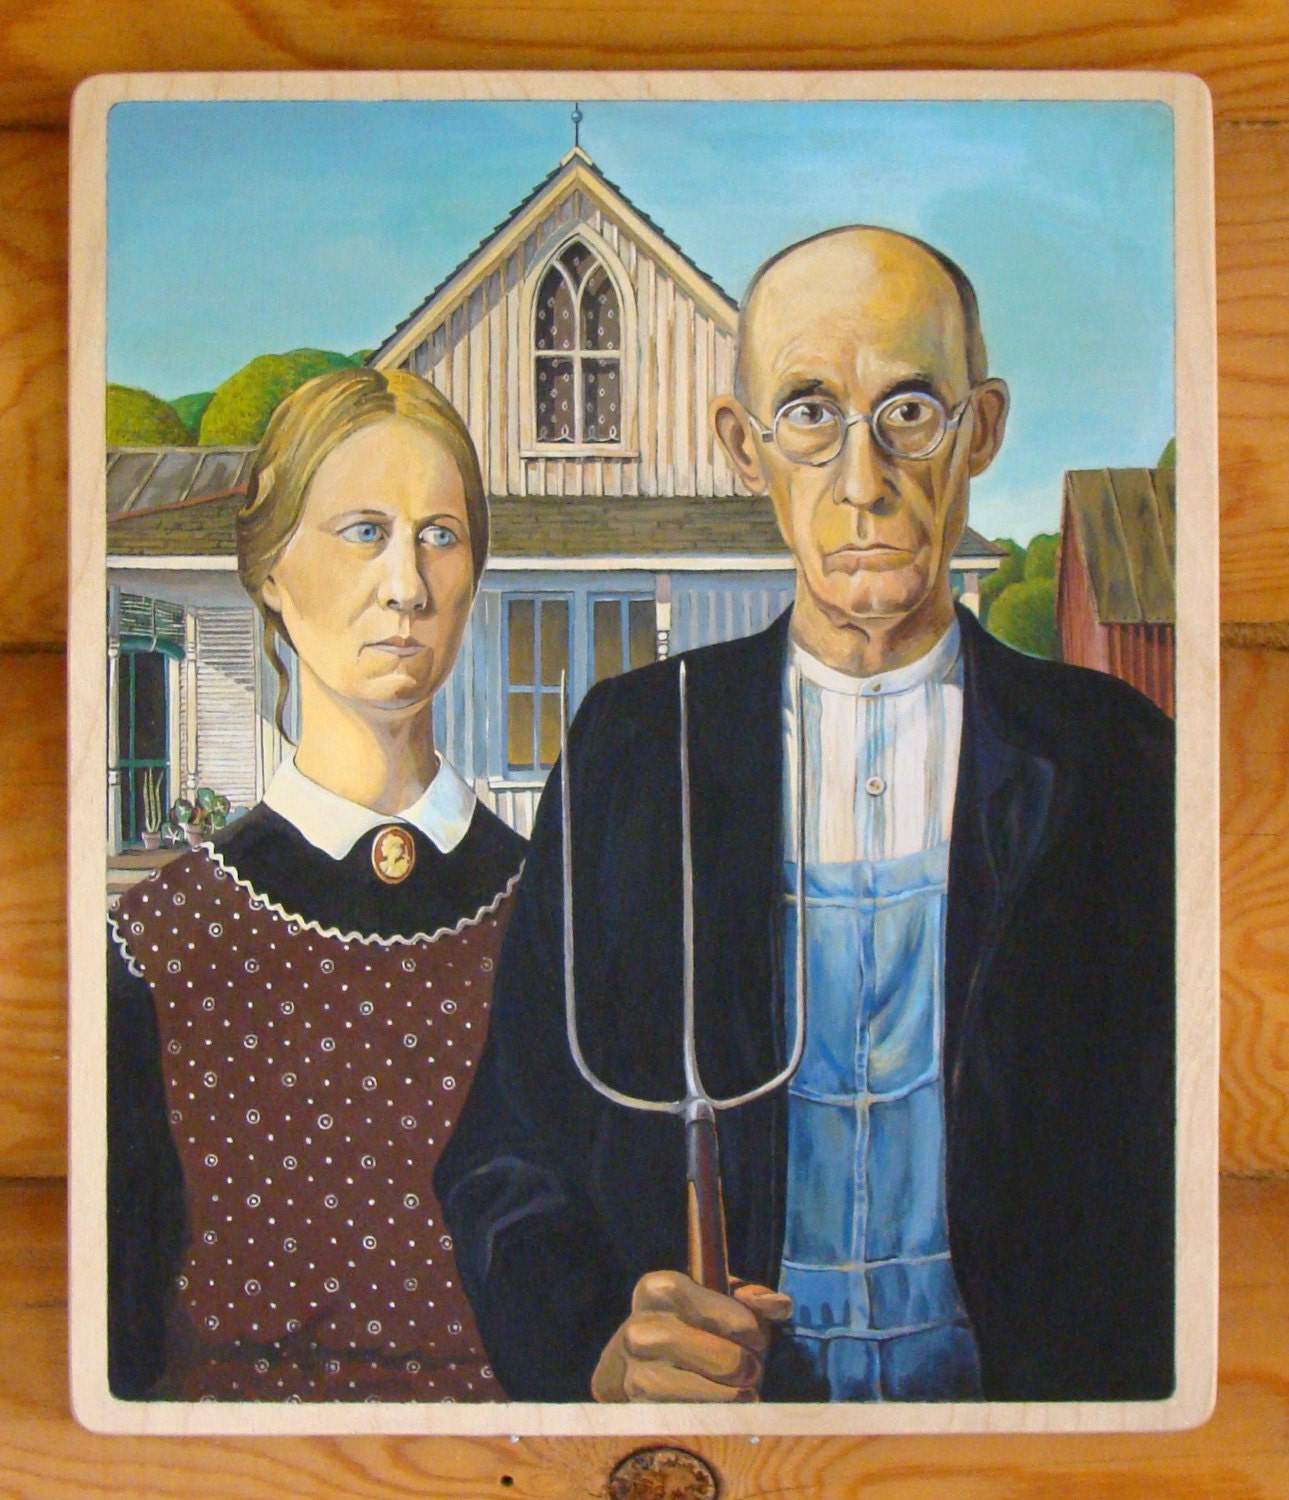 Copy of the painting by Grant Wood American Gothic